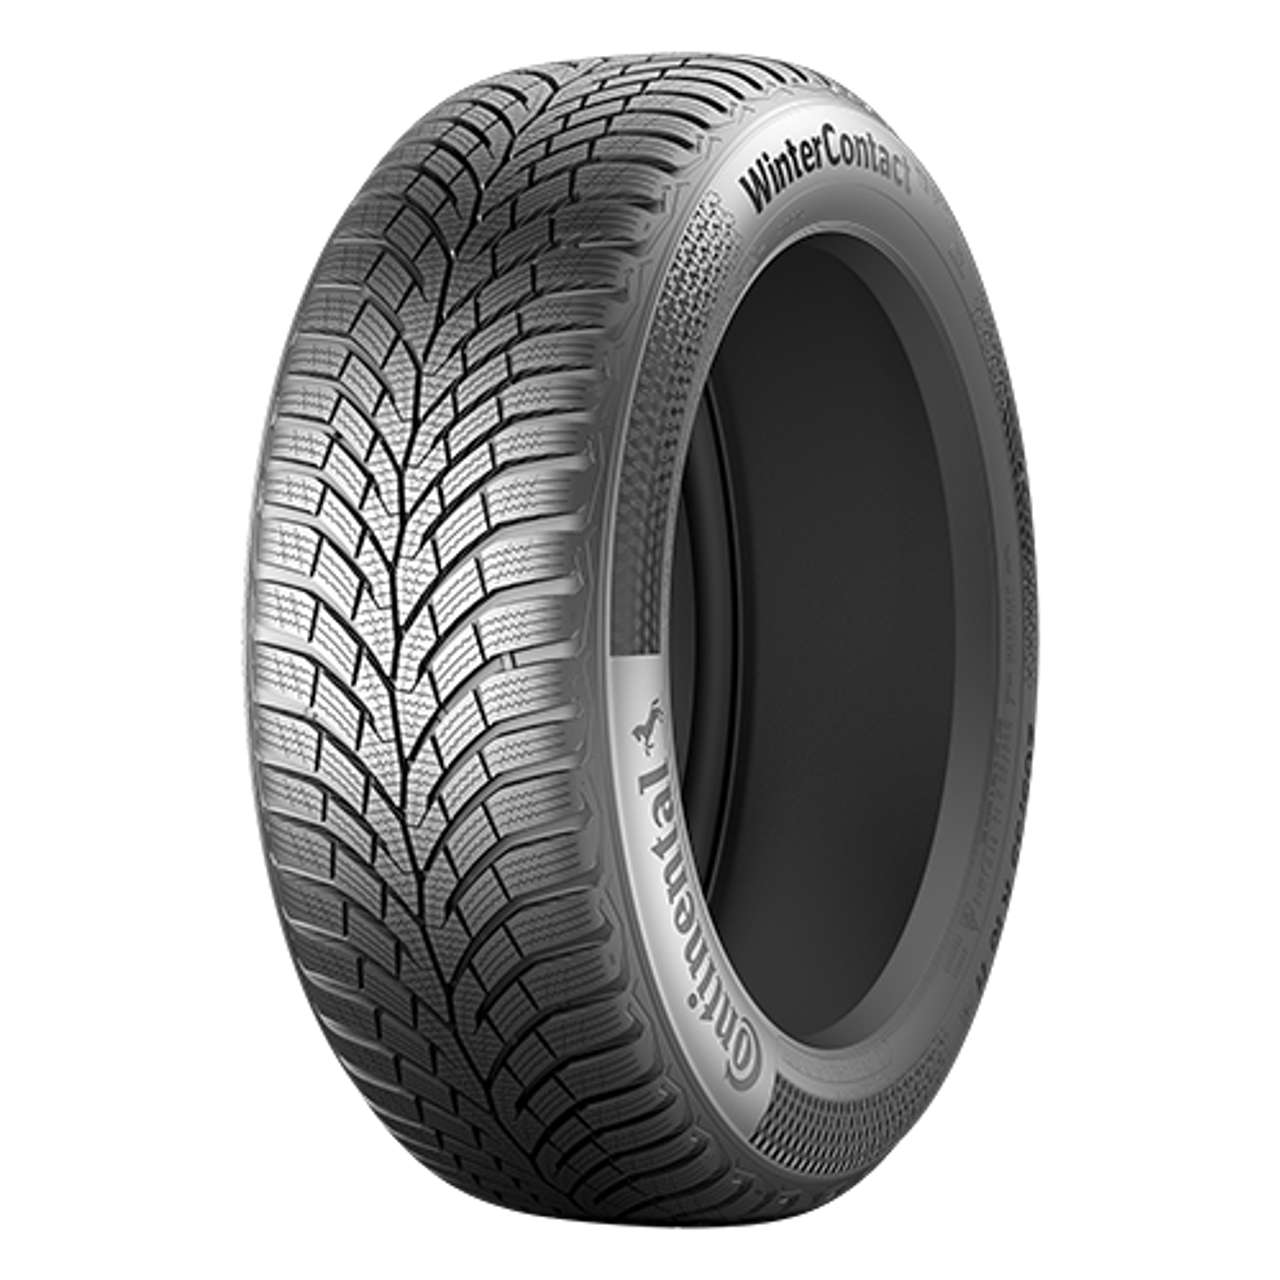 CONTINENTAL WINTERCONTACT TS 870 (EVc) 165/60R15 77T BSW von Continental